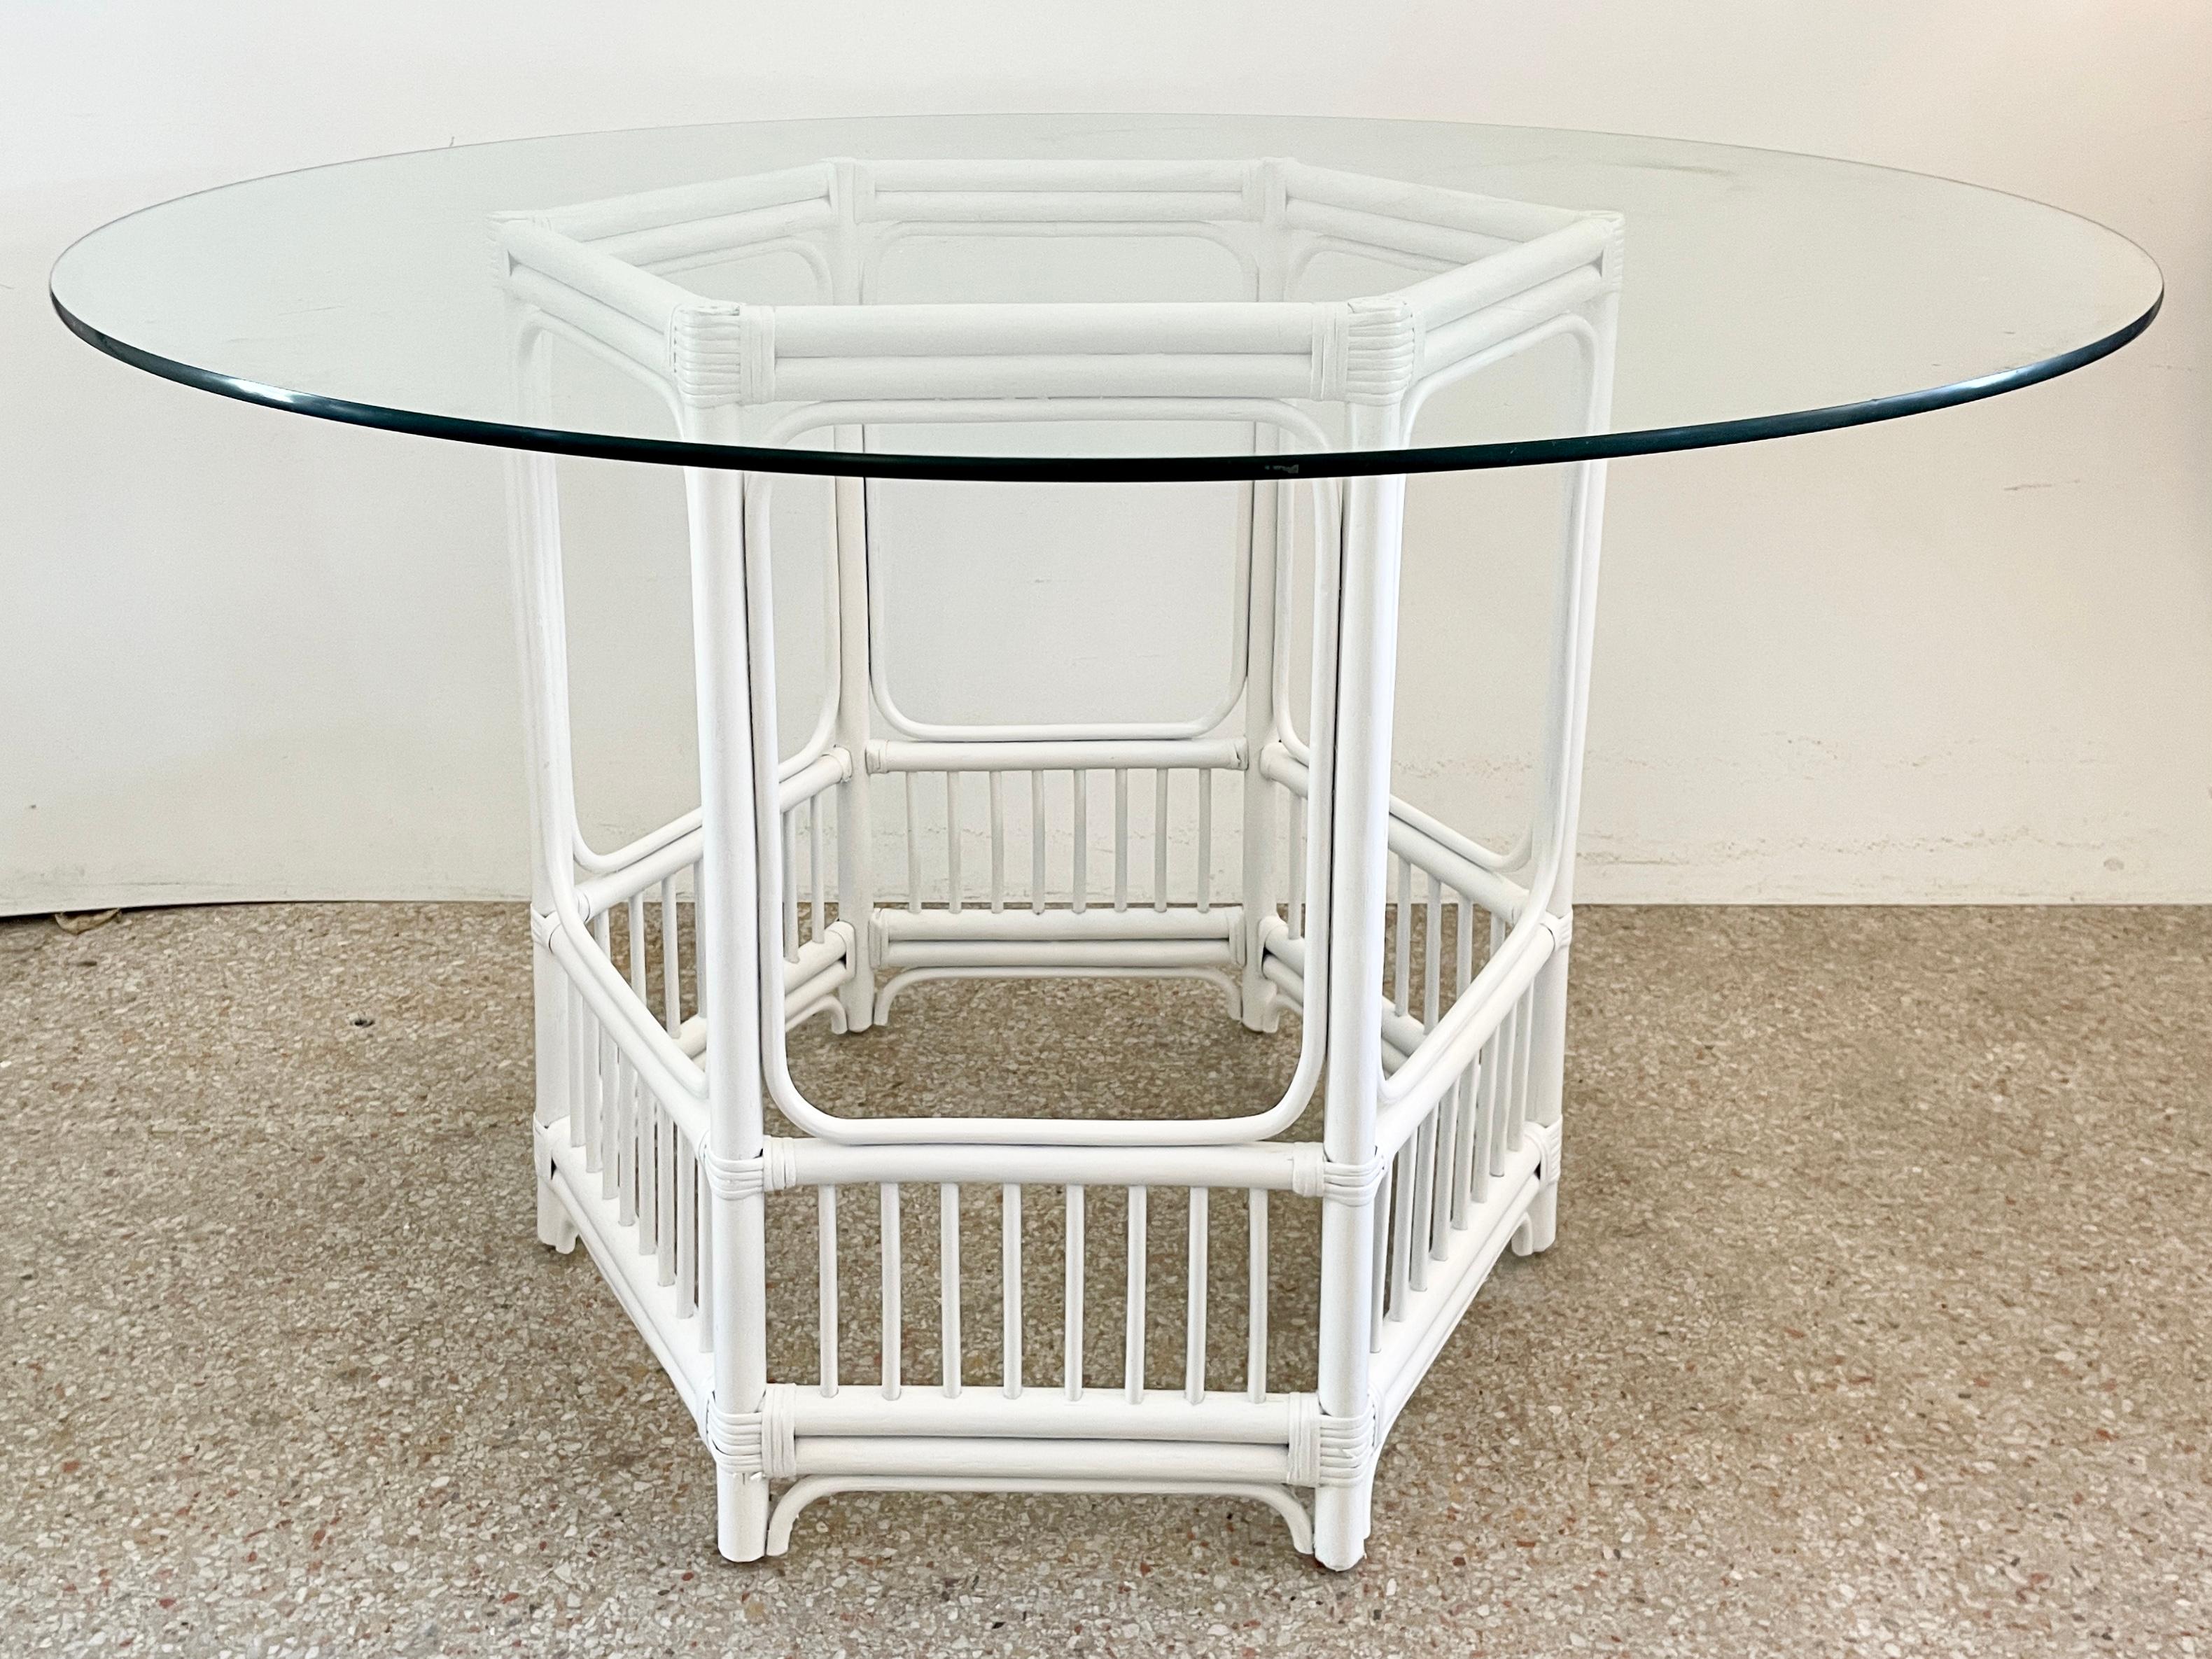 reeded table base